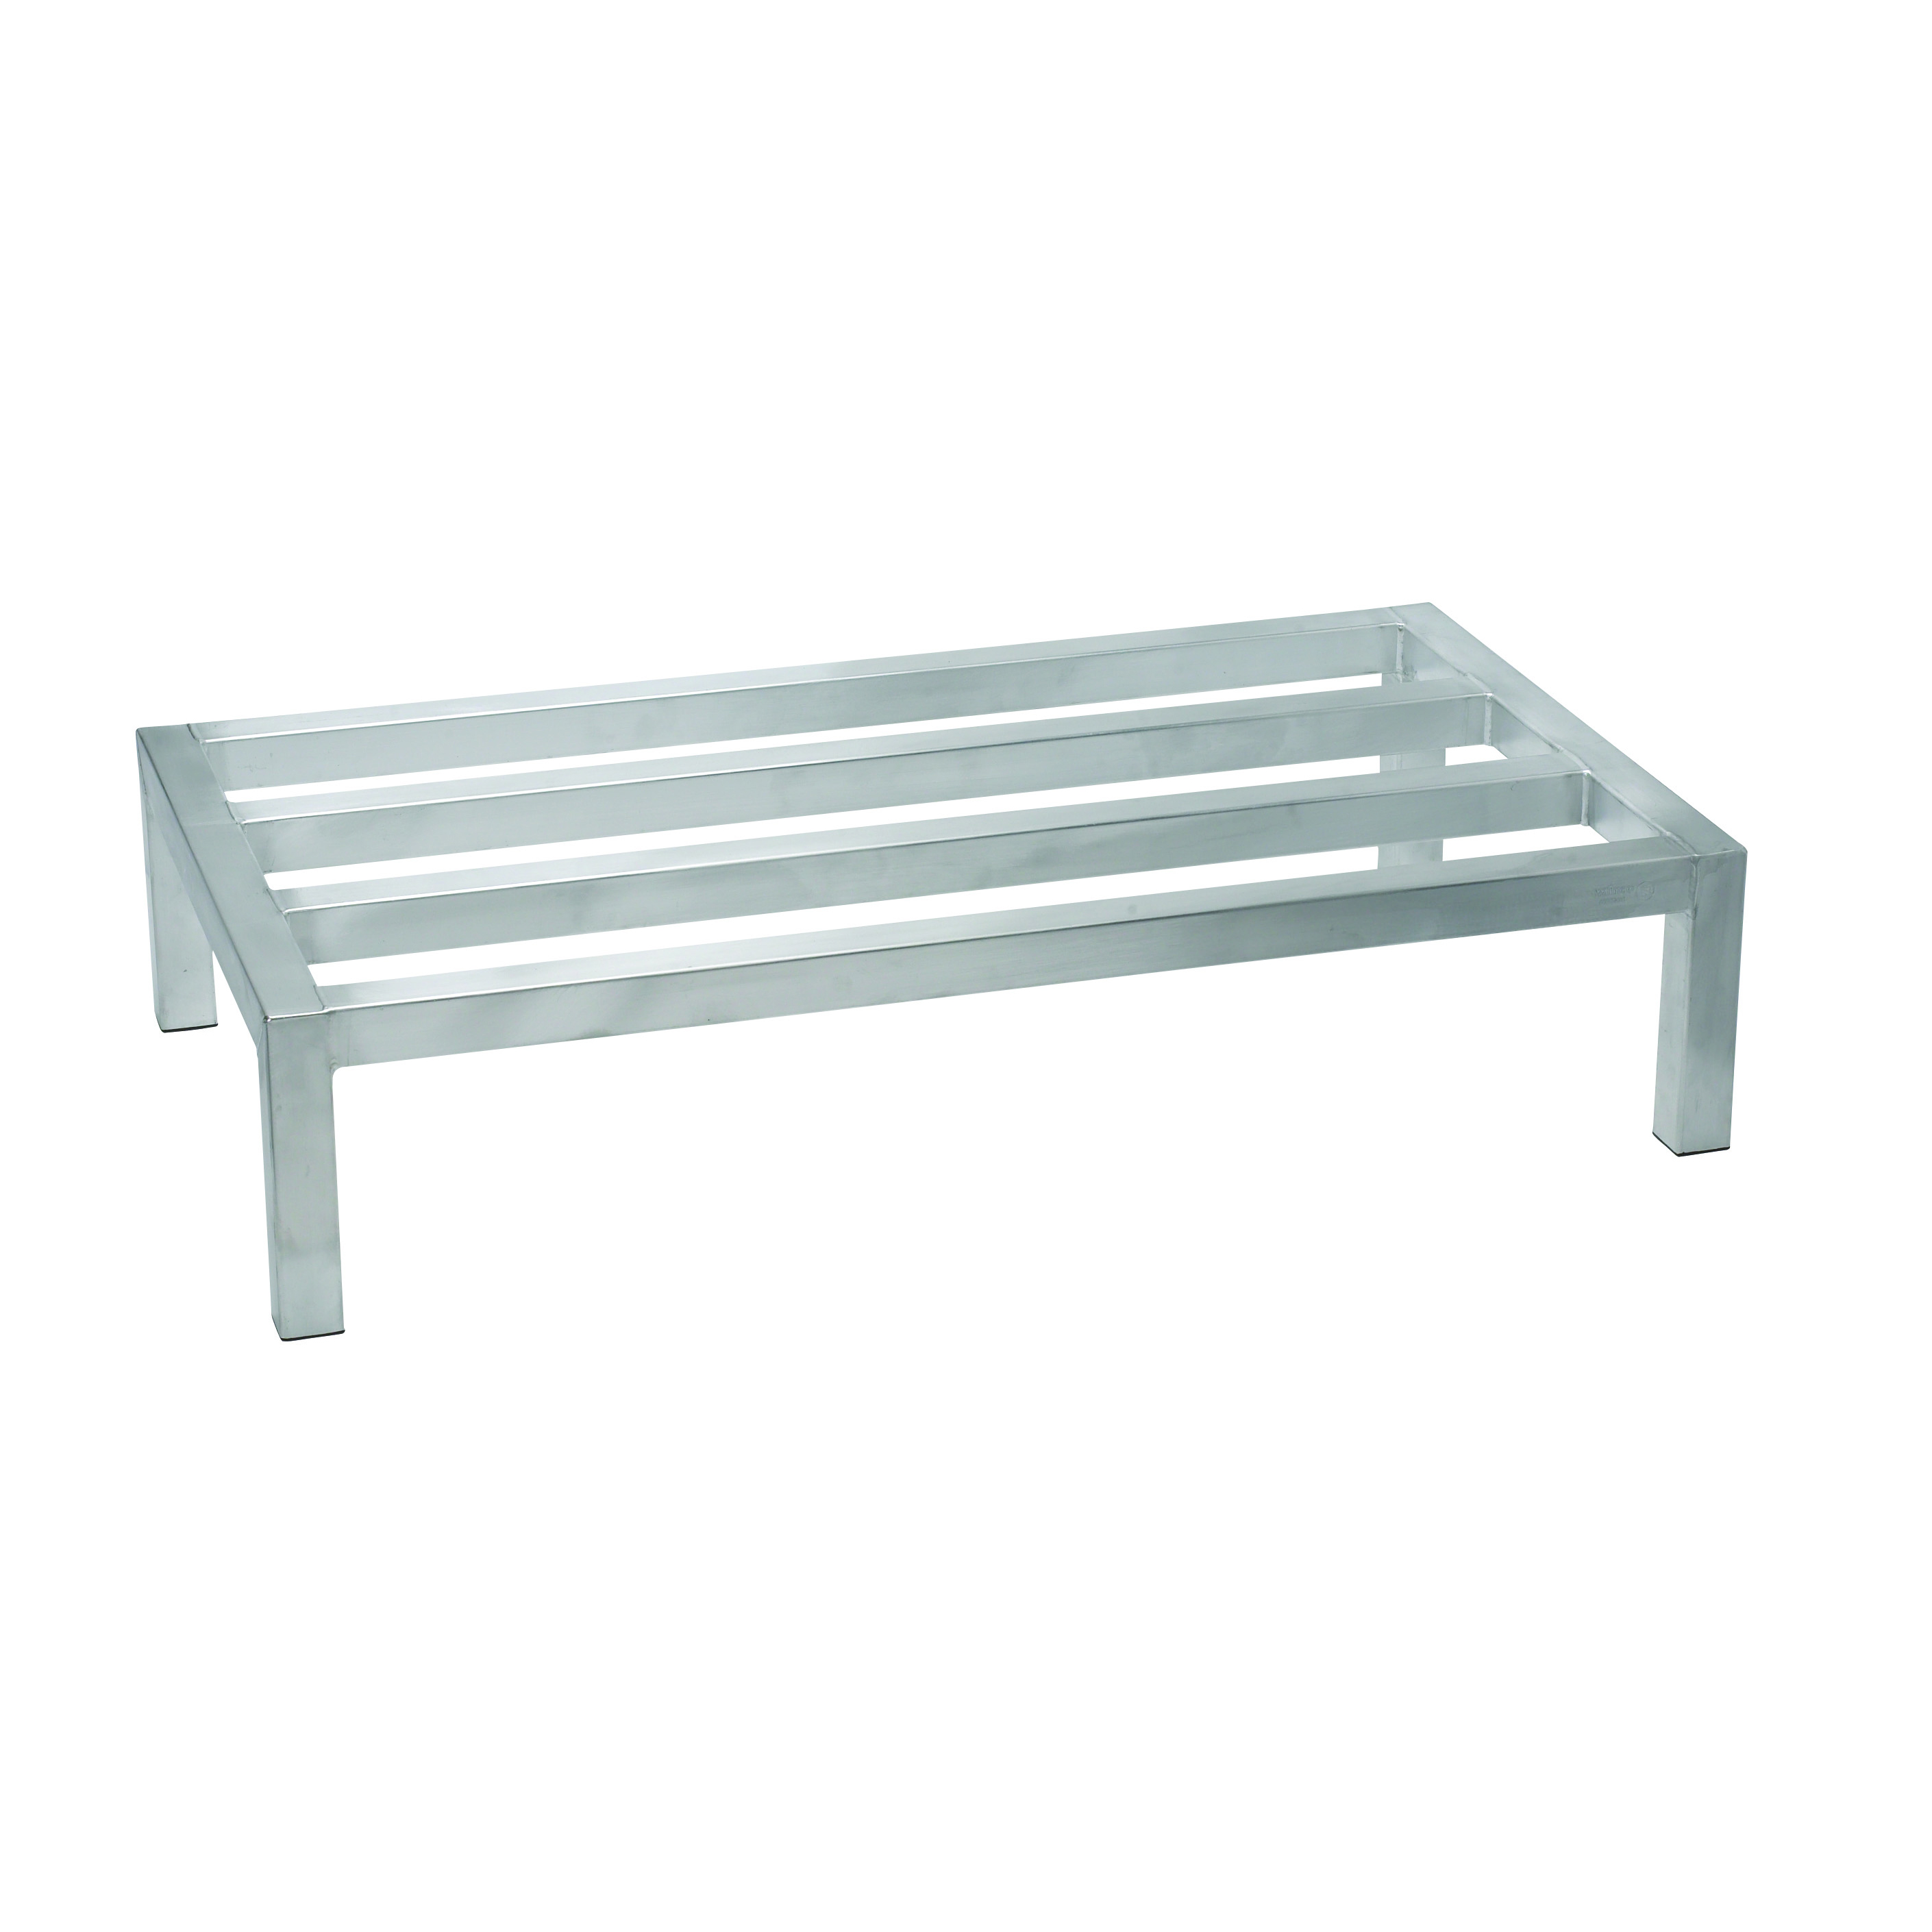 14&quot; X 24&quot; X 8&quot;DUNNAGE RACK,
HOLDS UP TO 1200
LBS,TUBULAR,ALU